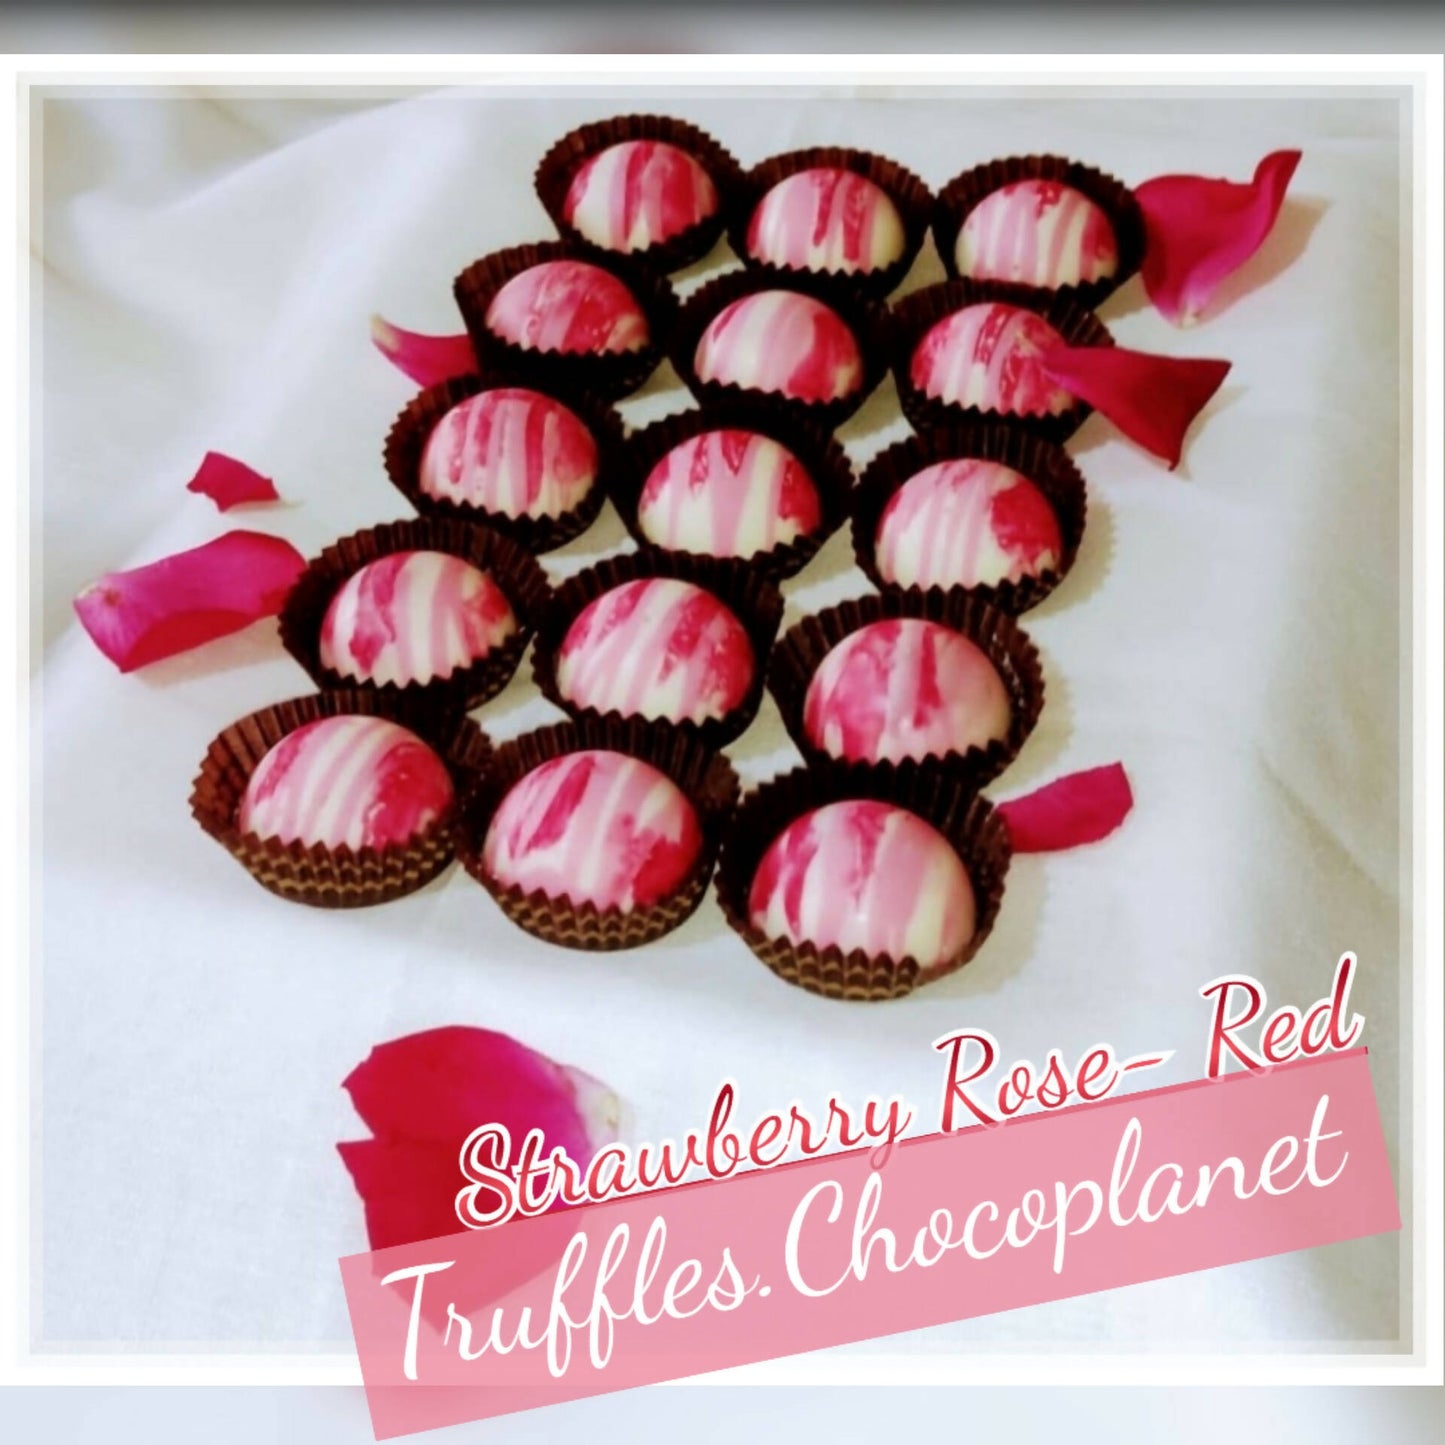 Strawberry Rose- Red Truffles 6 Pieces